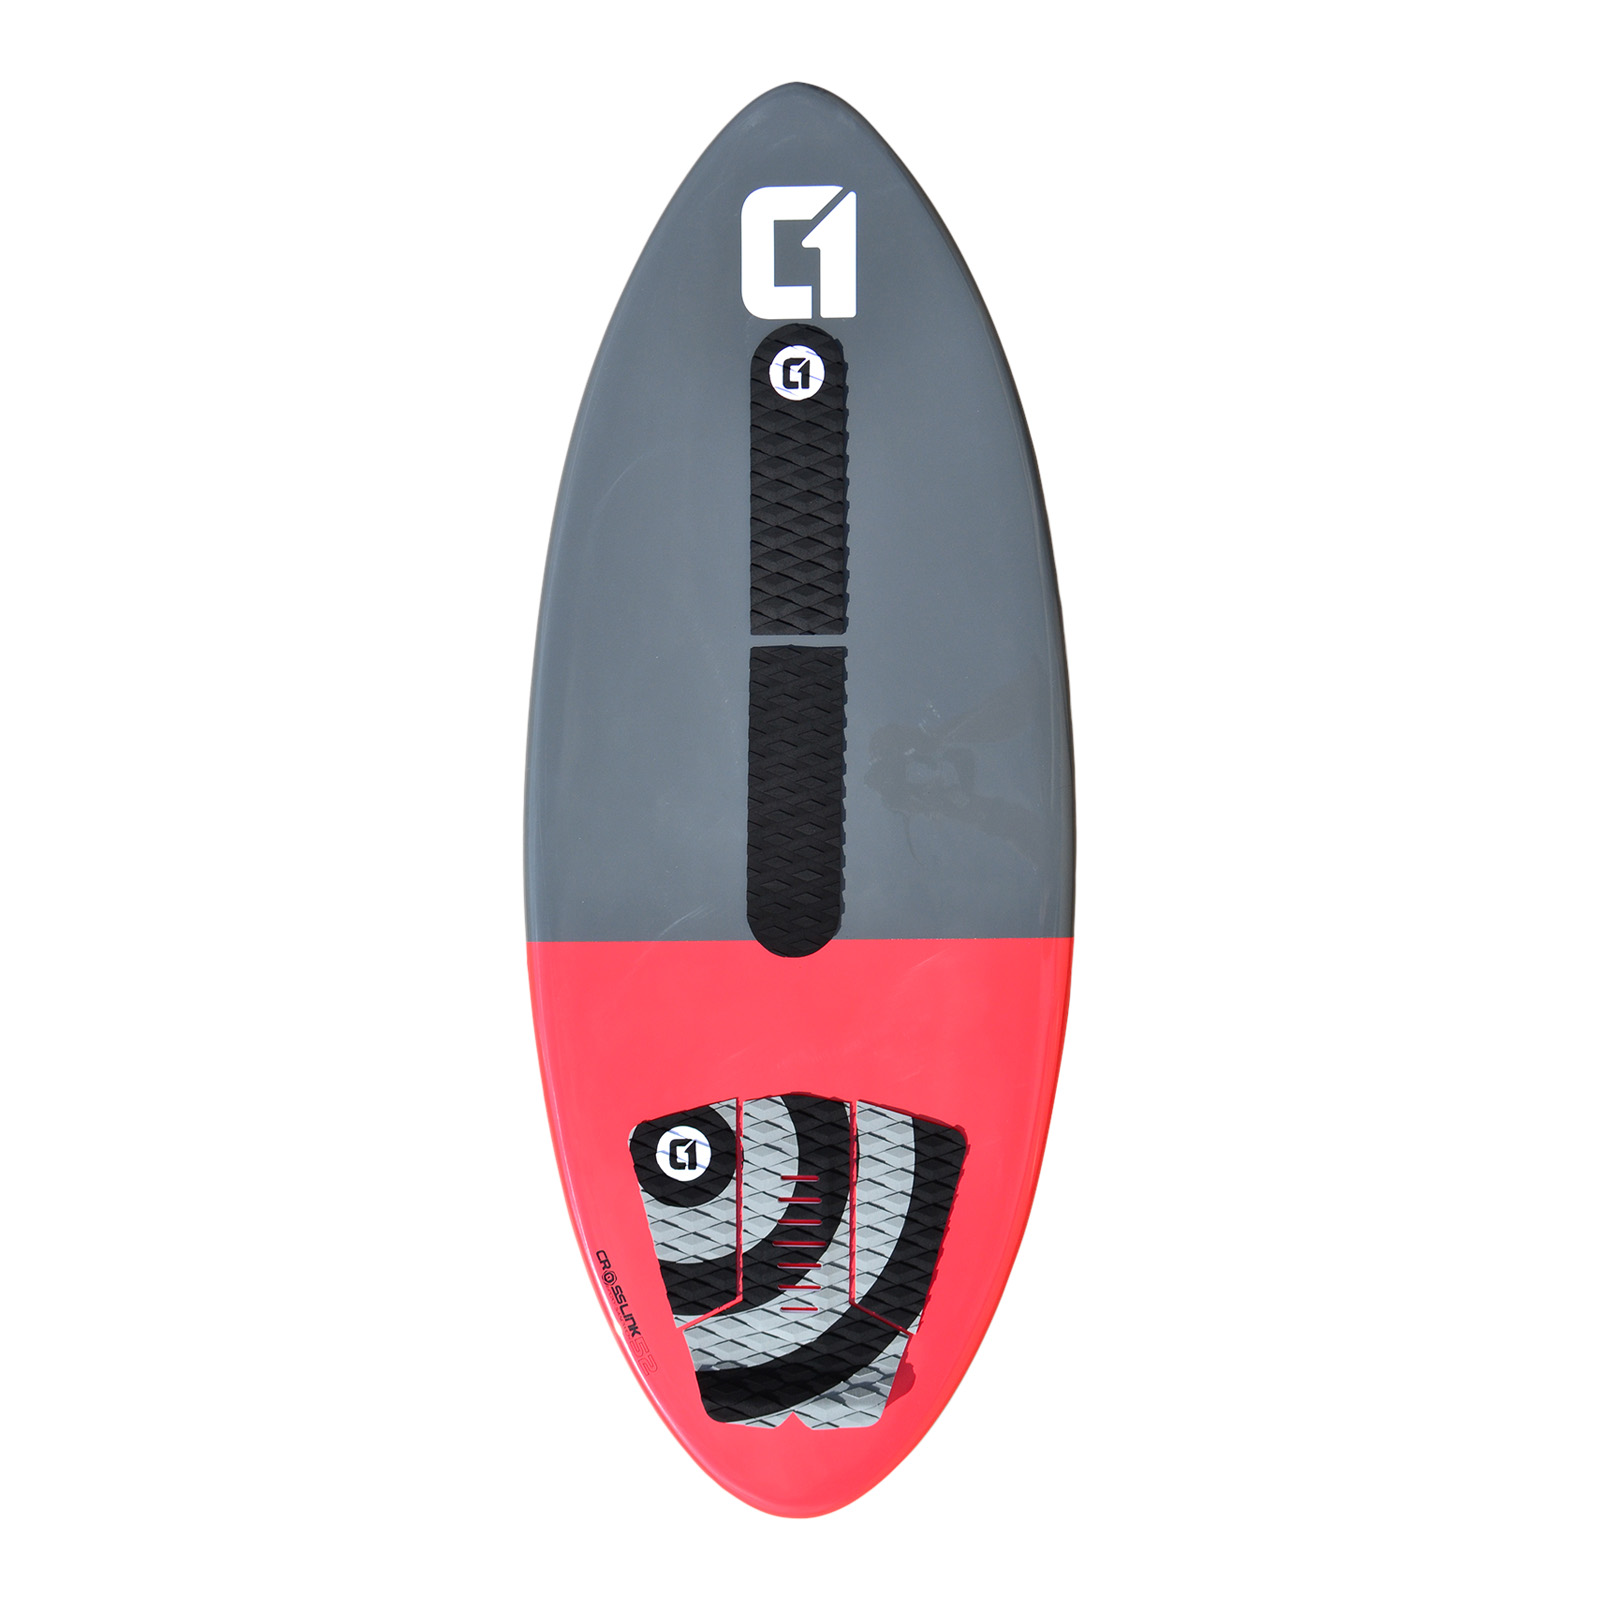 Includes Bag Archbar Carbon Fibre Epoxy Skimboard Package Traction Pad & Wax 